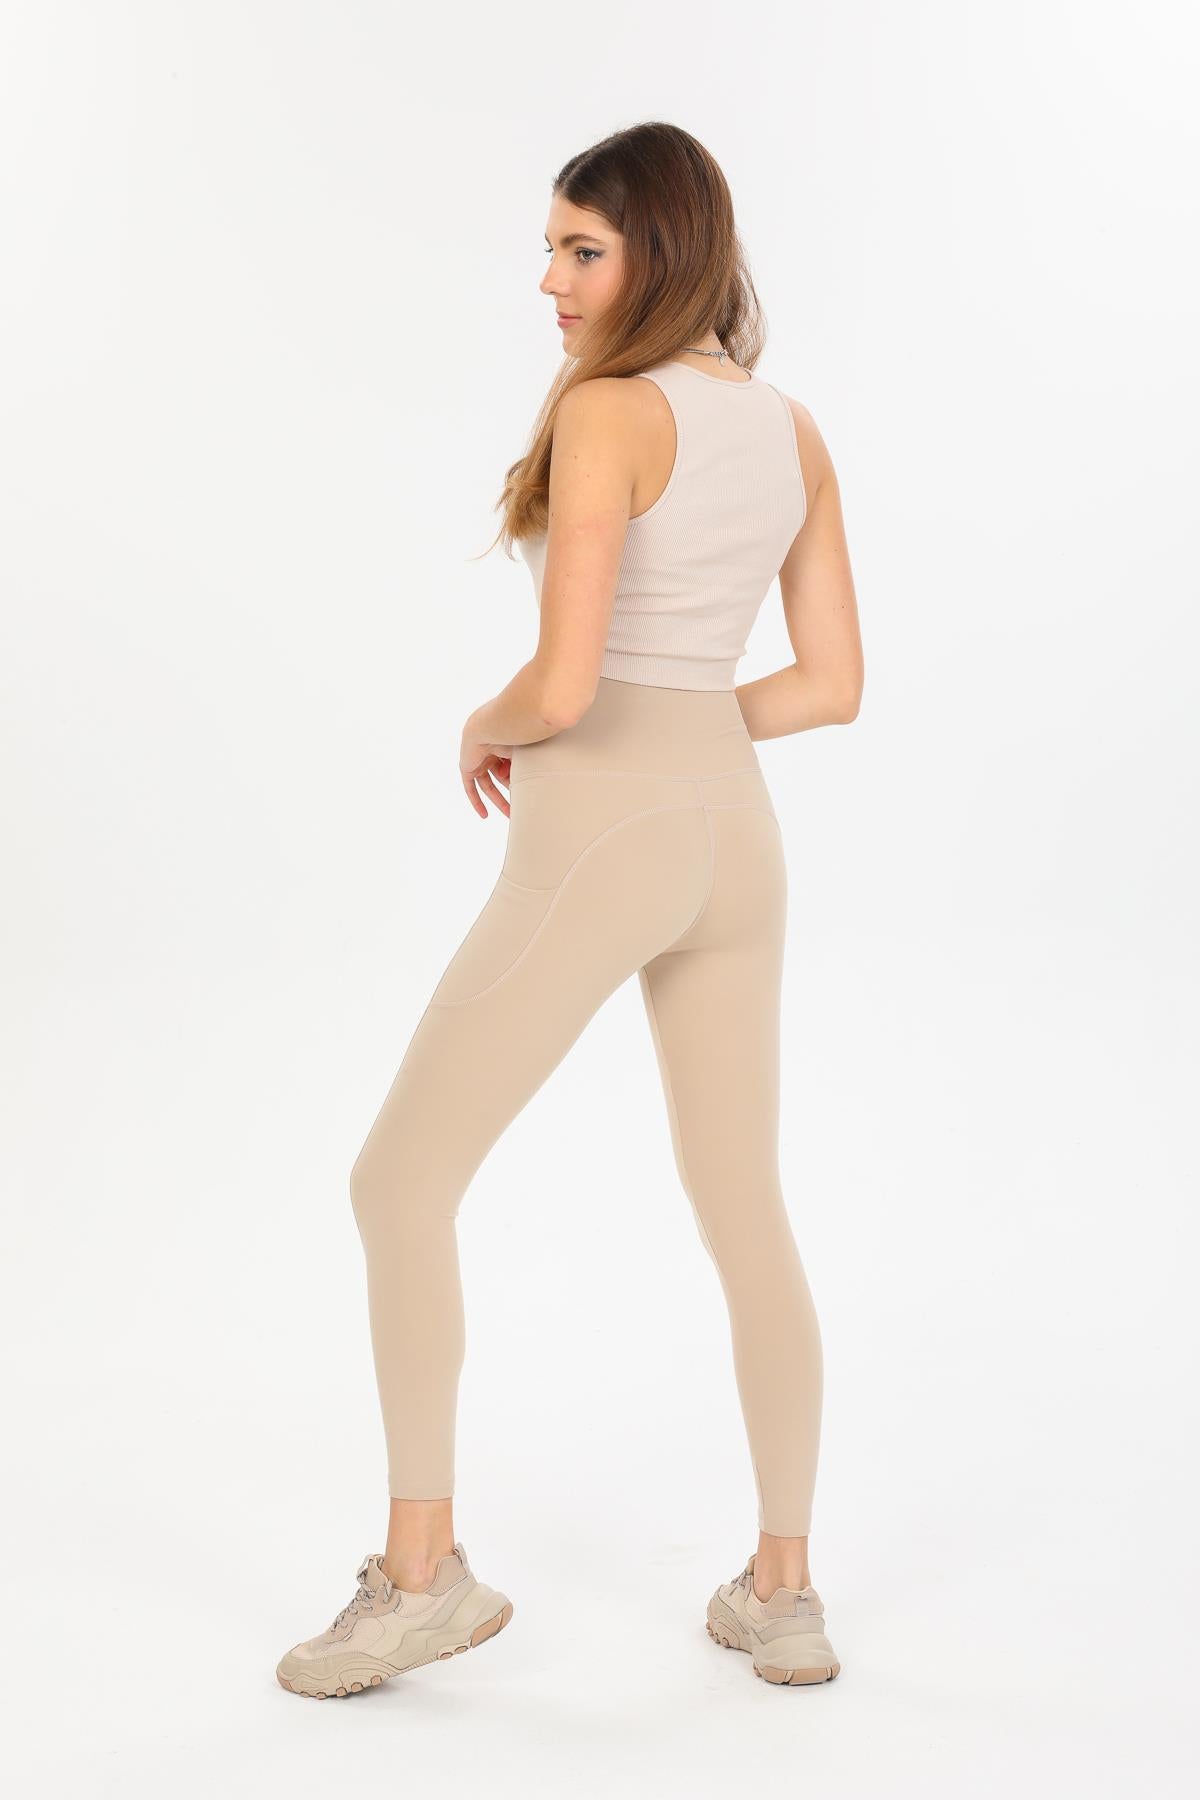 High Waist Double Pocket Sports and Daily Use Setting female leggings